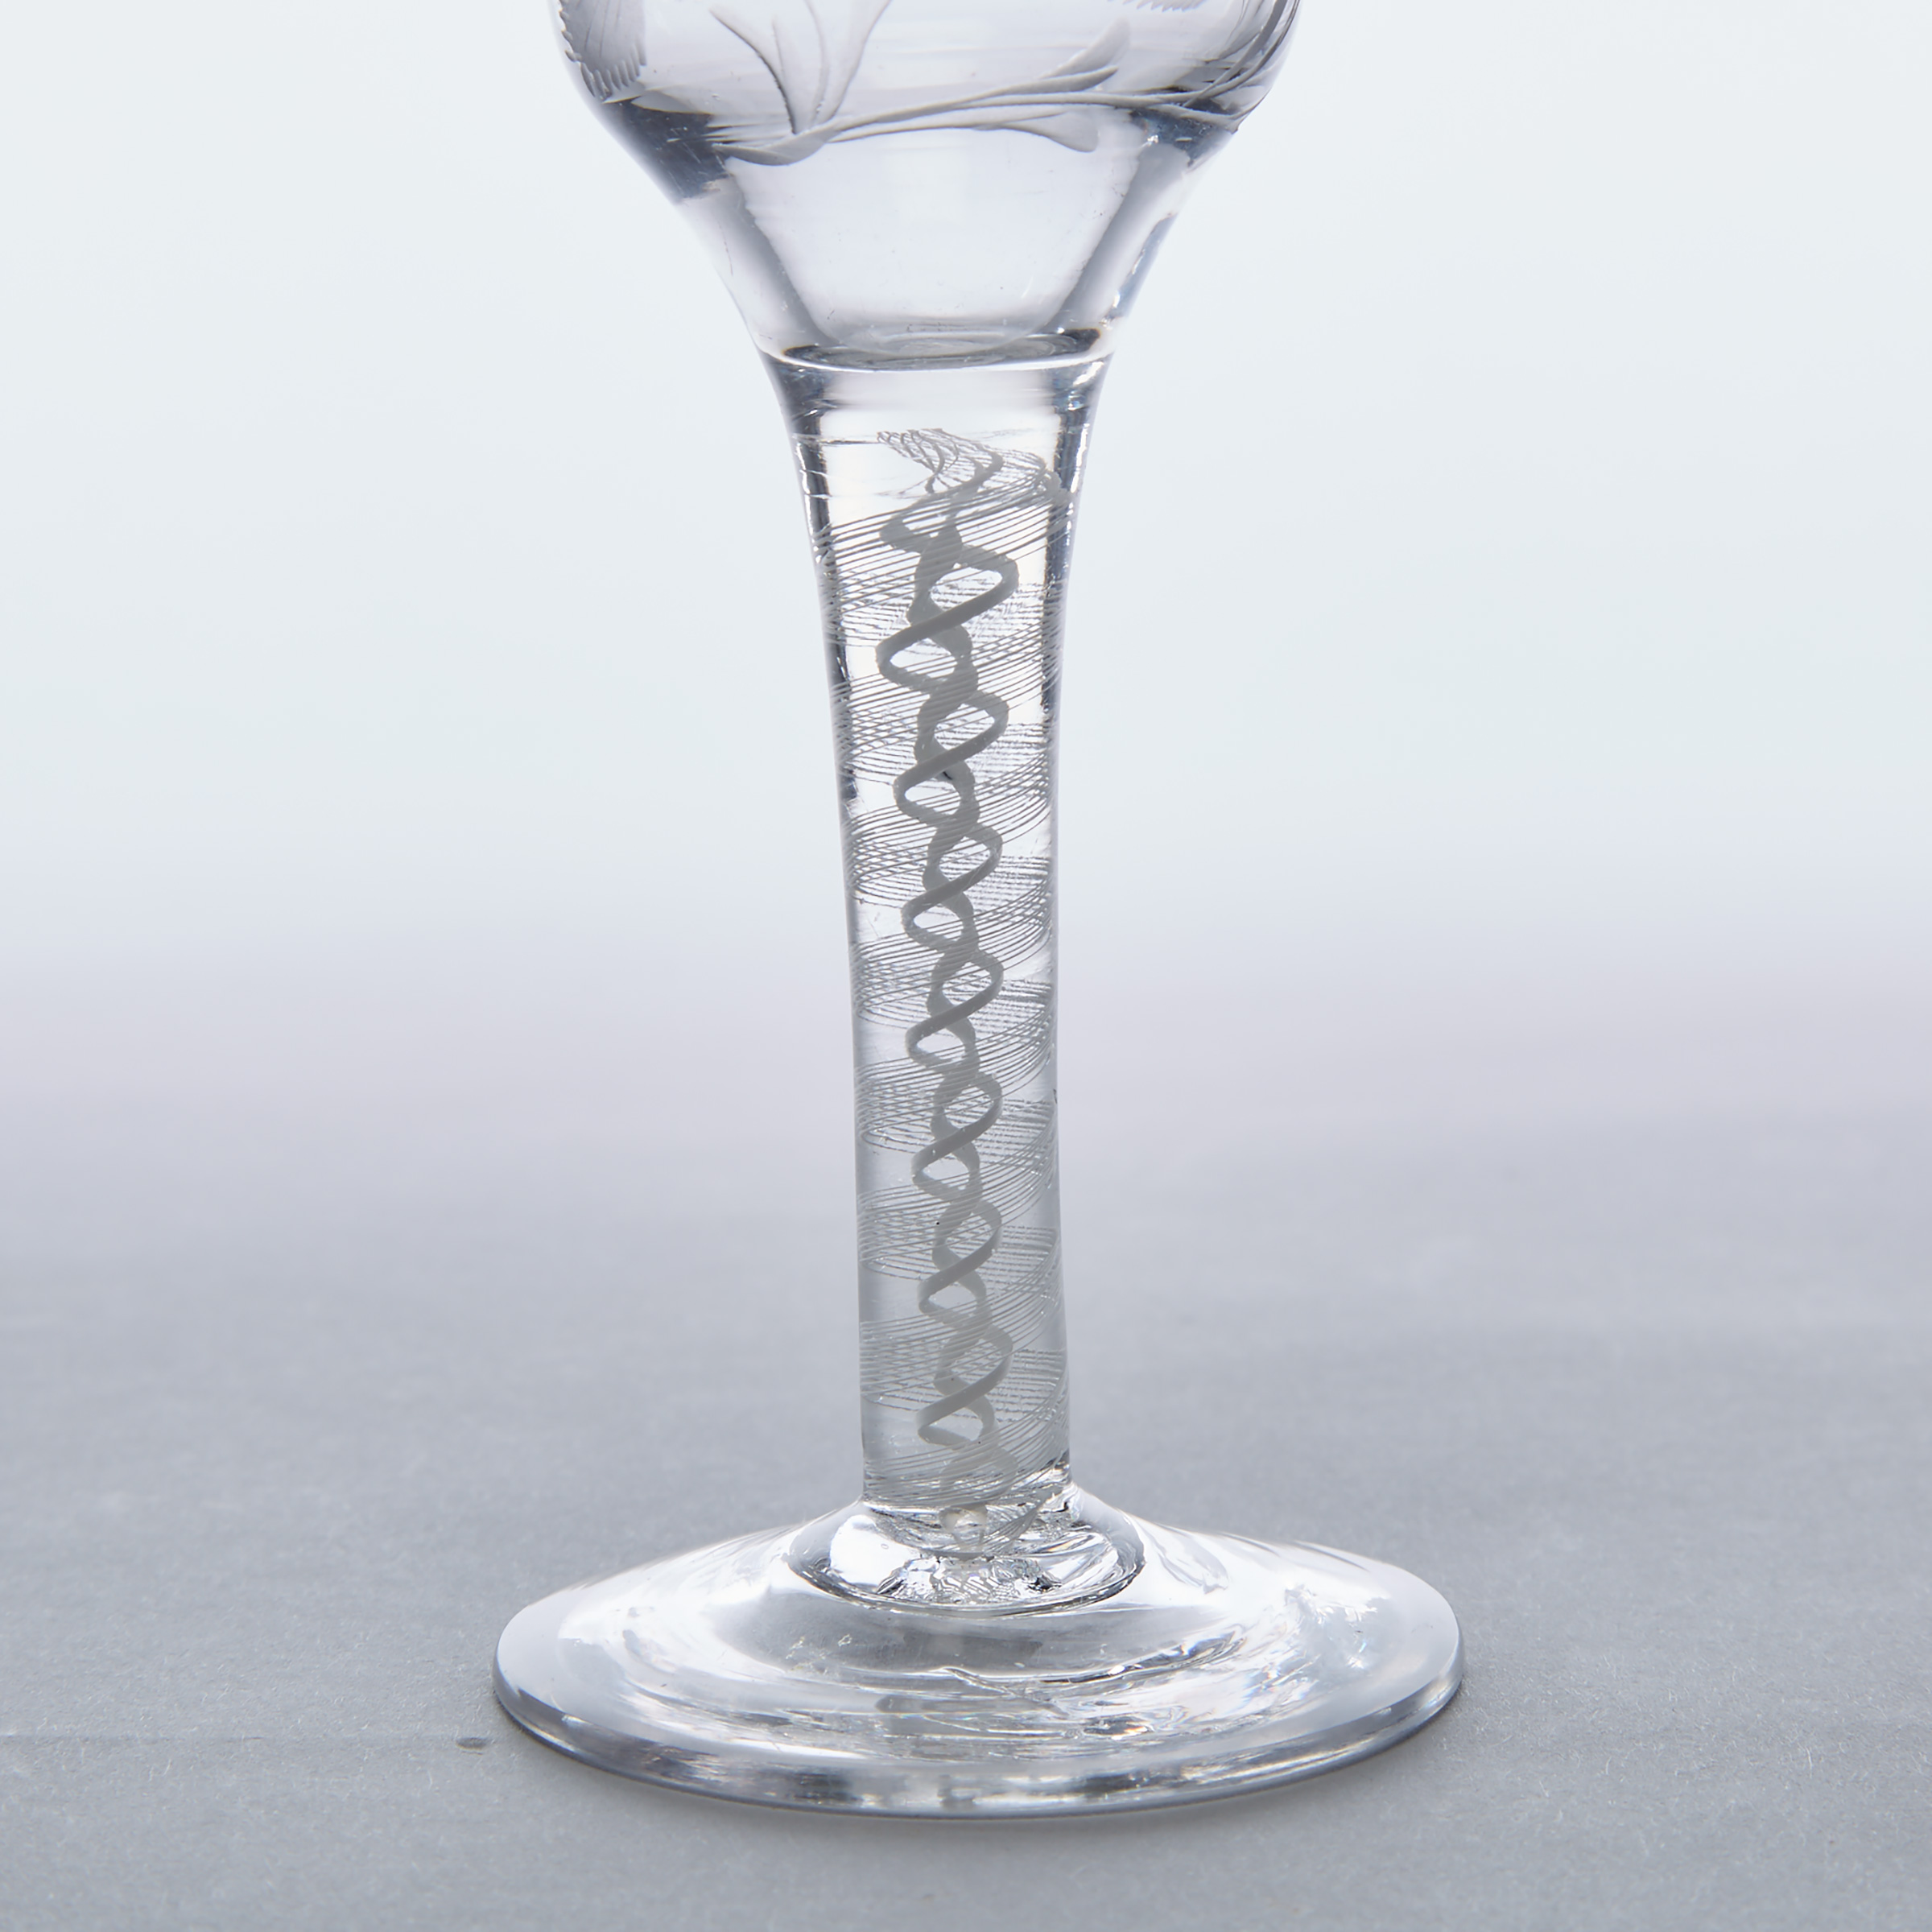 Jacobite Engraved Opaque Twist Stemmed Wine Glass, c.1760